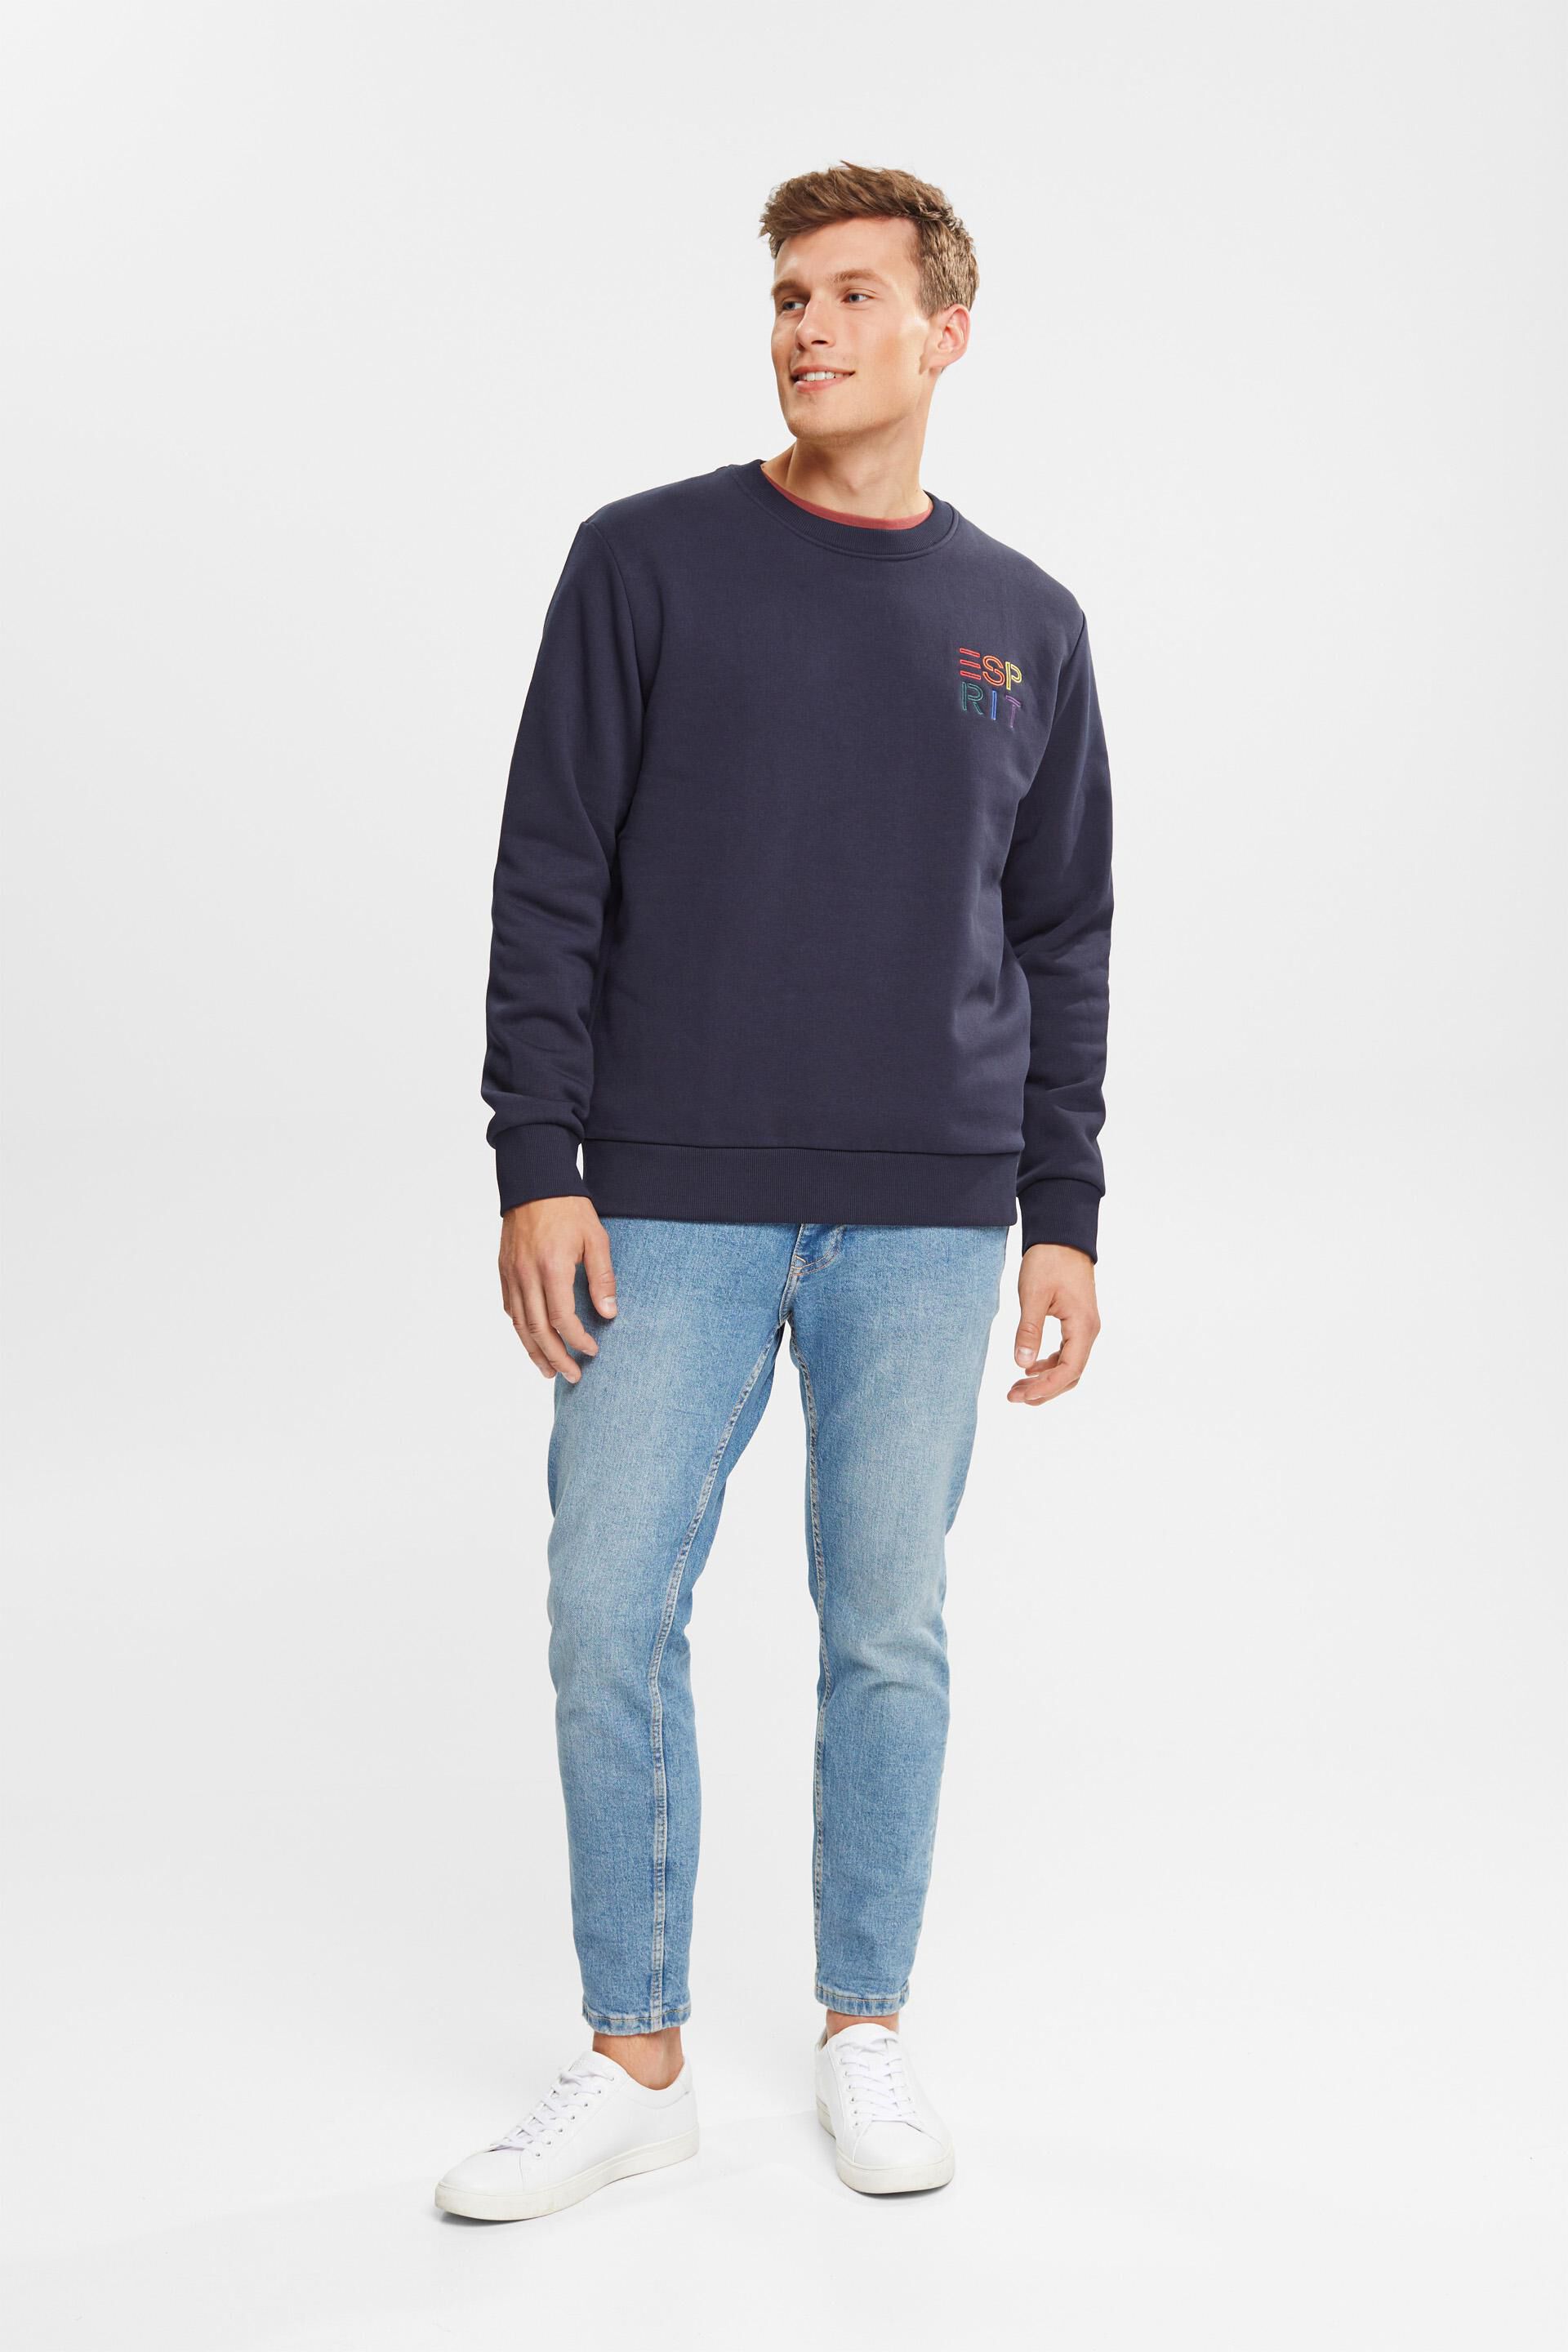 Esprit logo a embroidered Sweatshirt colourful with